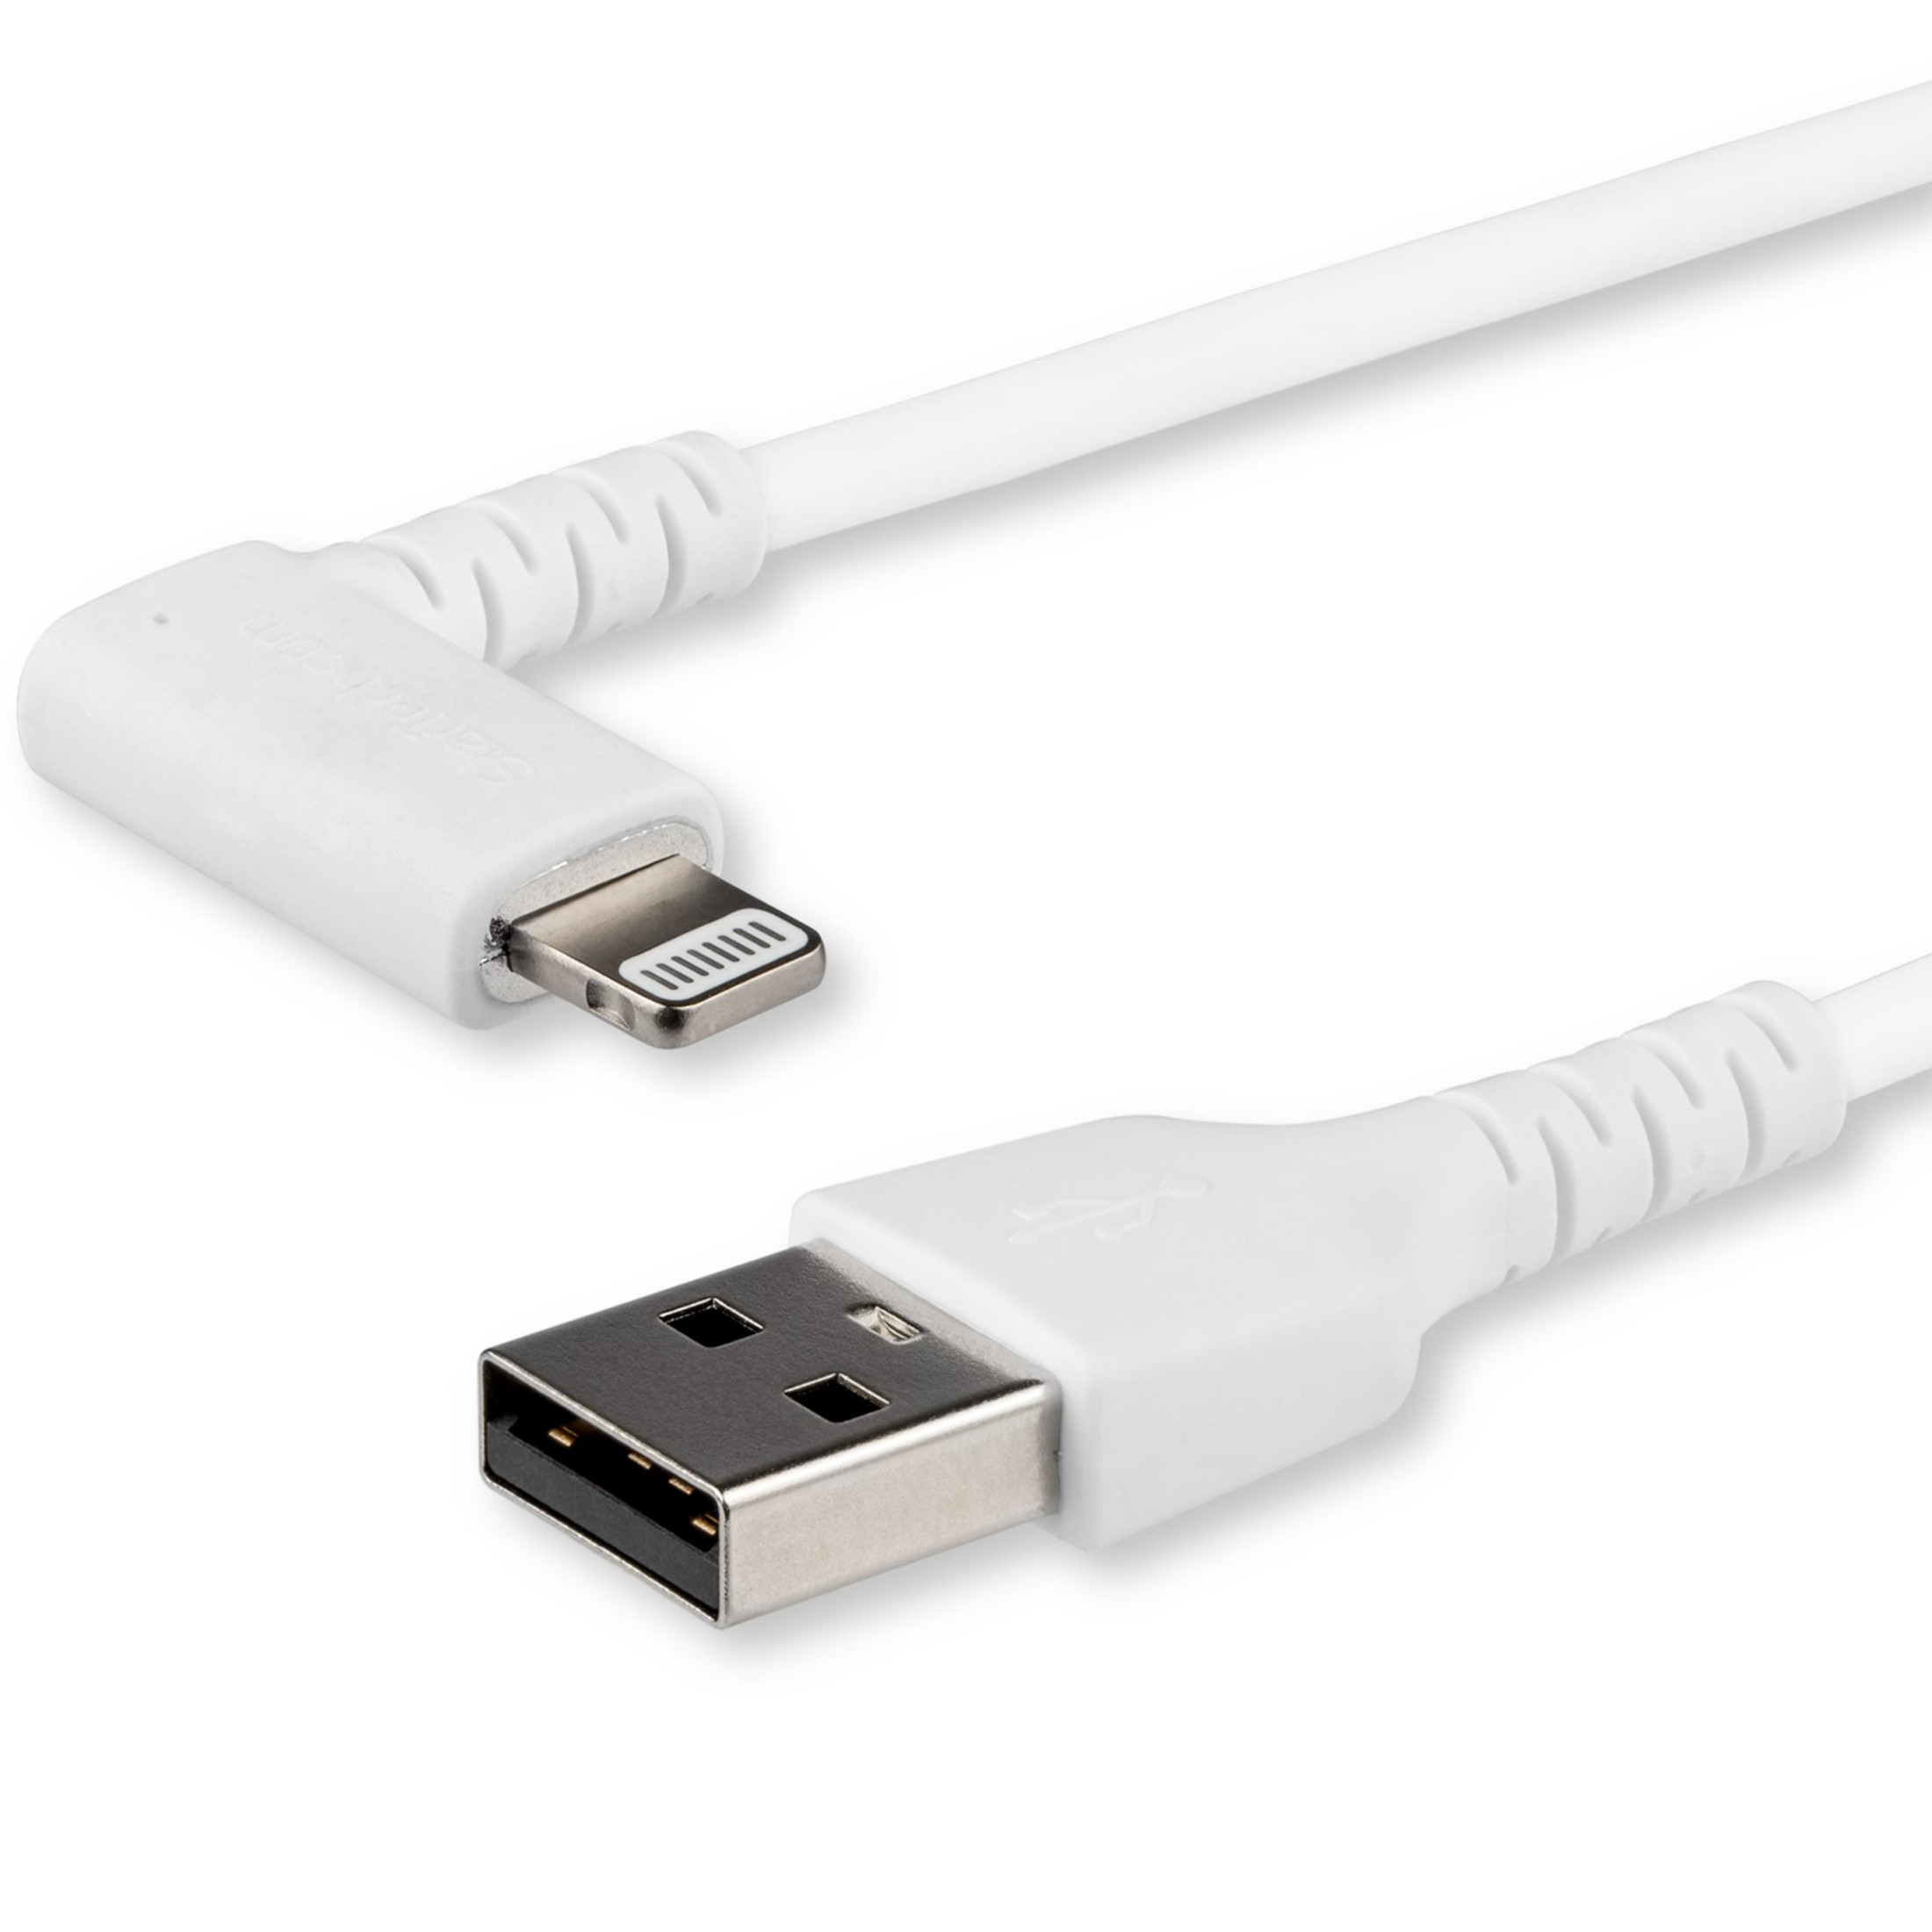 escocés Fiesta Comparar Startech .com 2m USB A to Lightning Cable iPhone iPad Durable Right Angled  90 Degree White Charger Cord w/Aramid Fiber Apple MFI Certified -...  RUSBLTMM2MWR - Corporate Armor